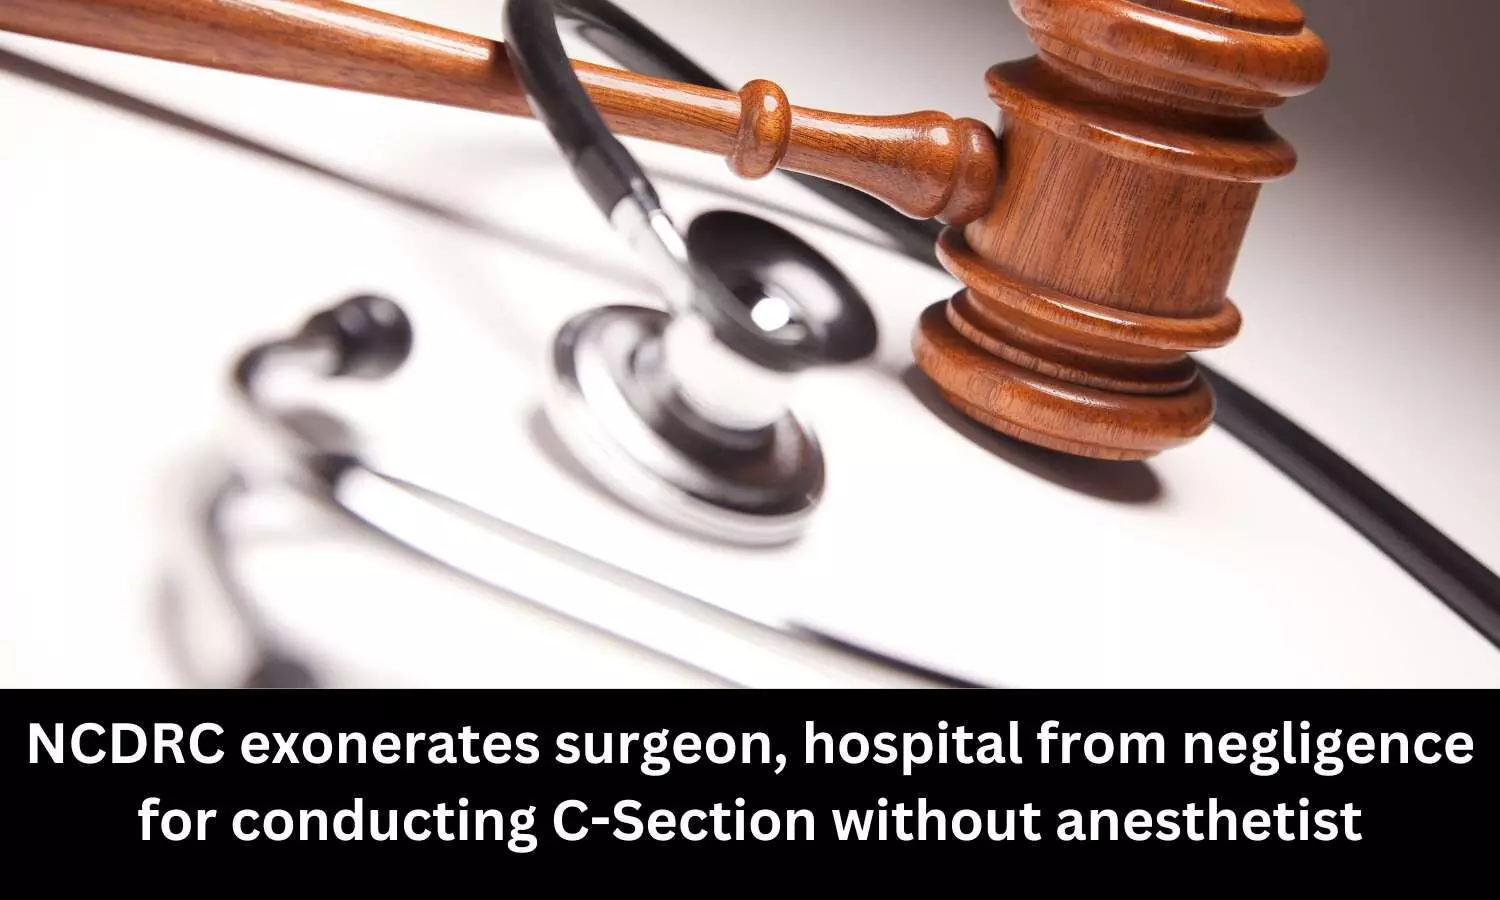 NCDRC exonerates surgeon, hospital from negligence for conducting C-Section without anesthetist